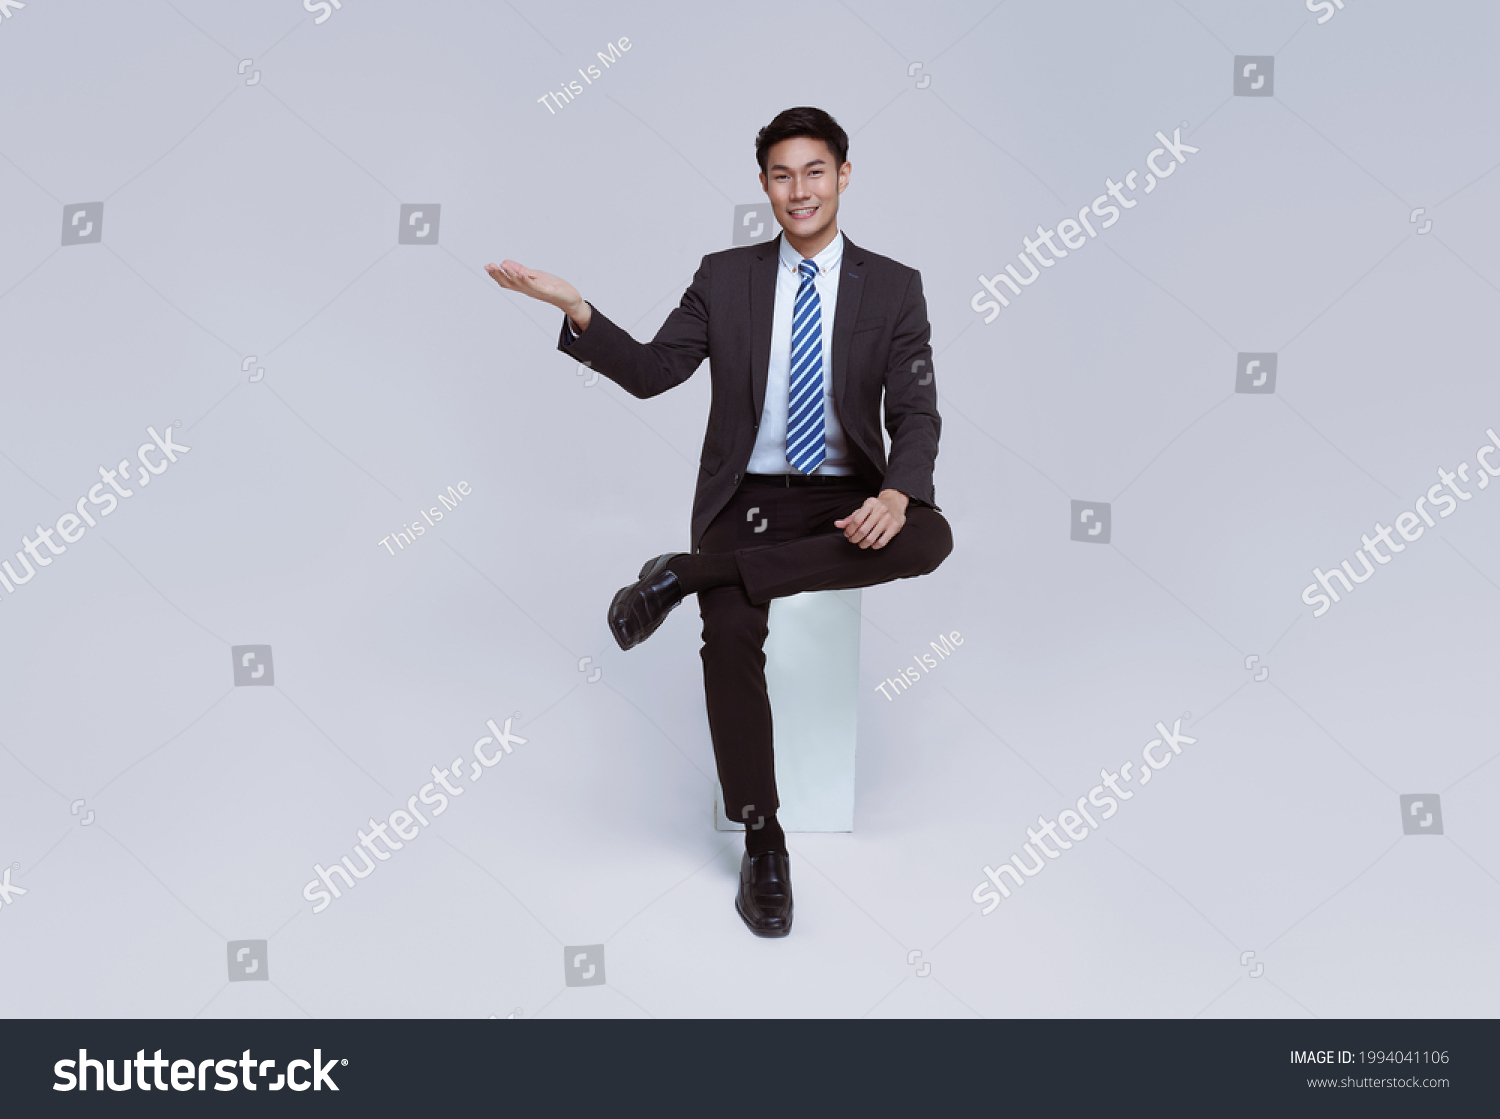 Handsome and friendly face asian businessman smile in formal suit sitting on chair points his hands to presented on white background studio shot. #1994041106